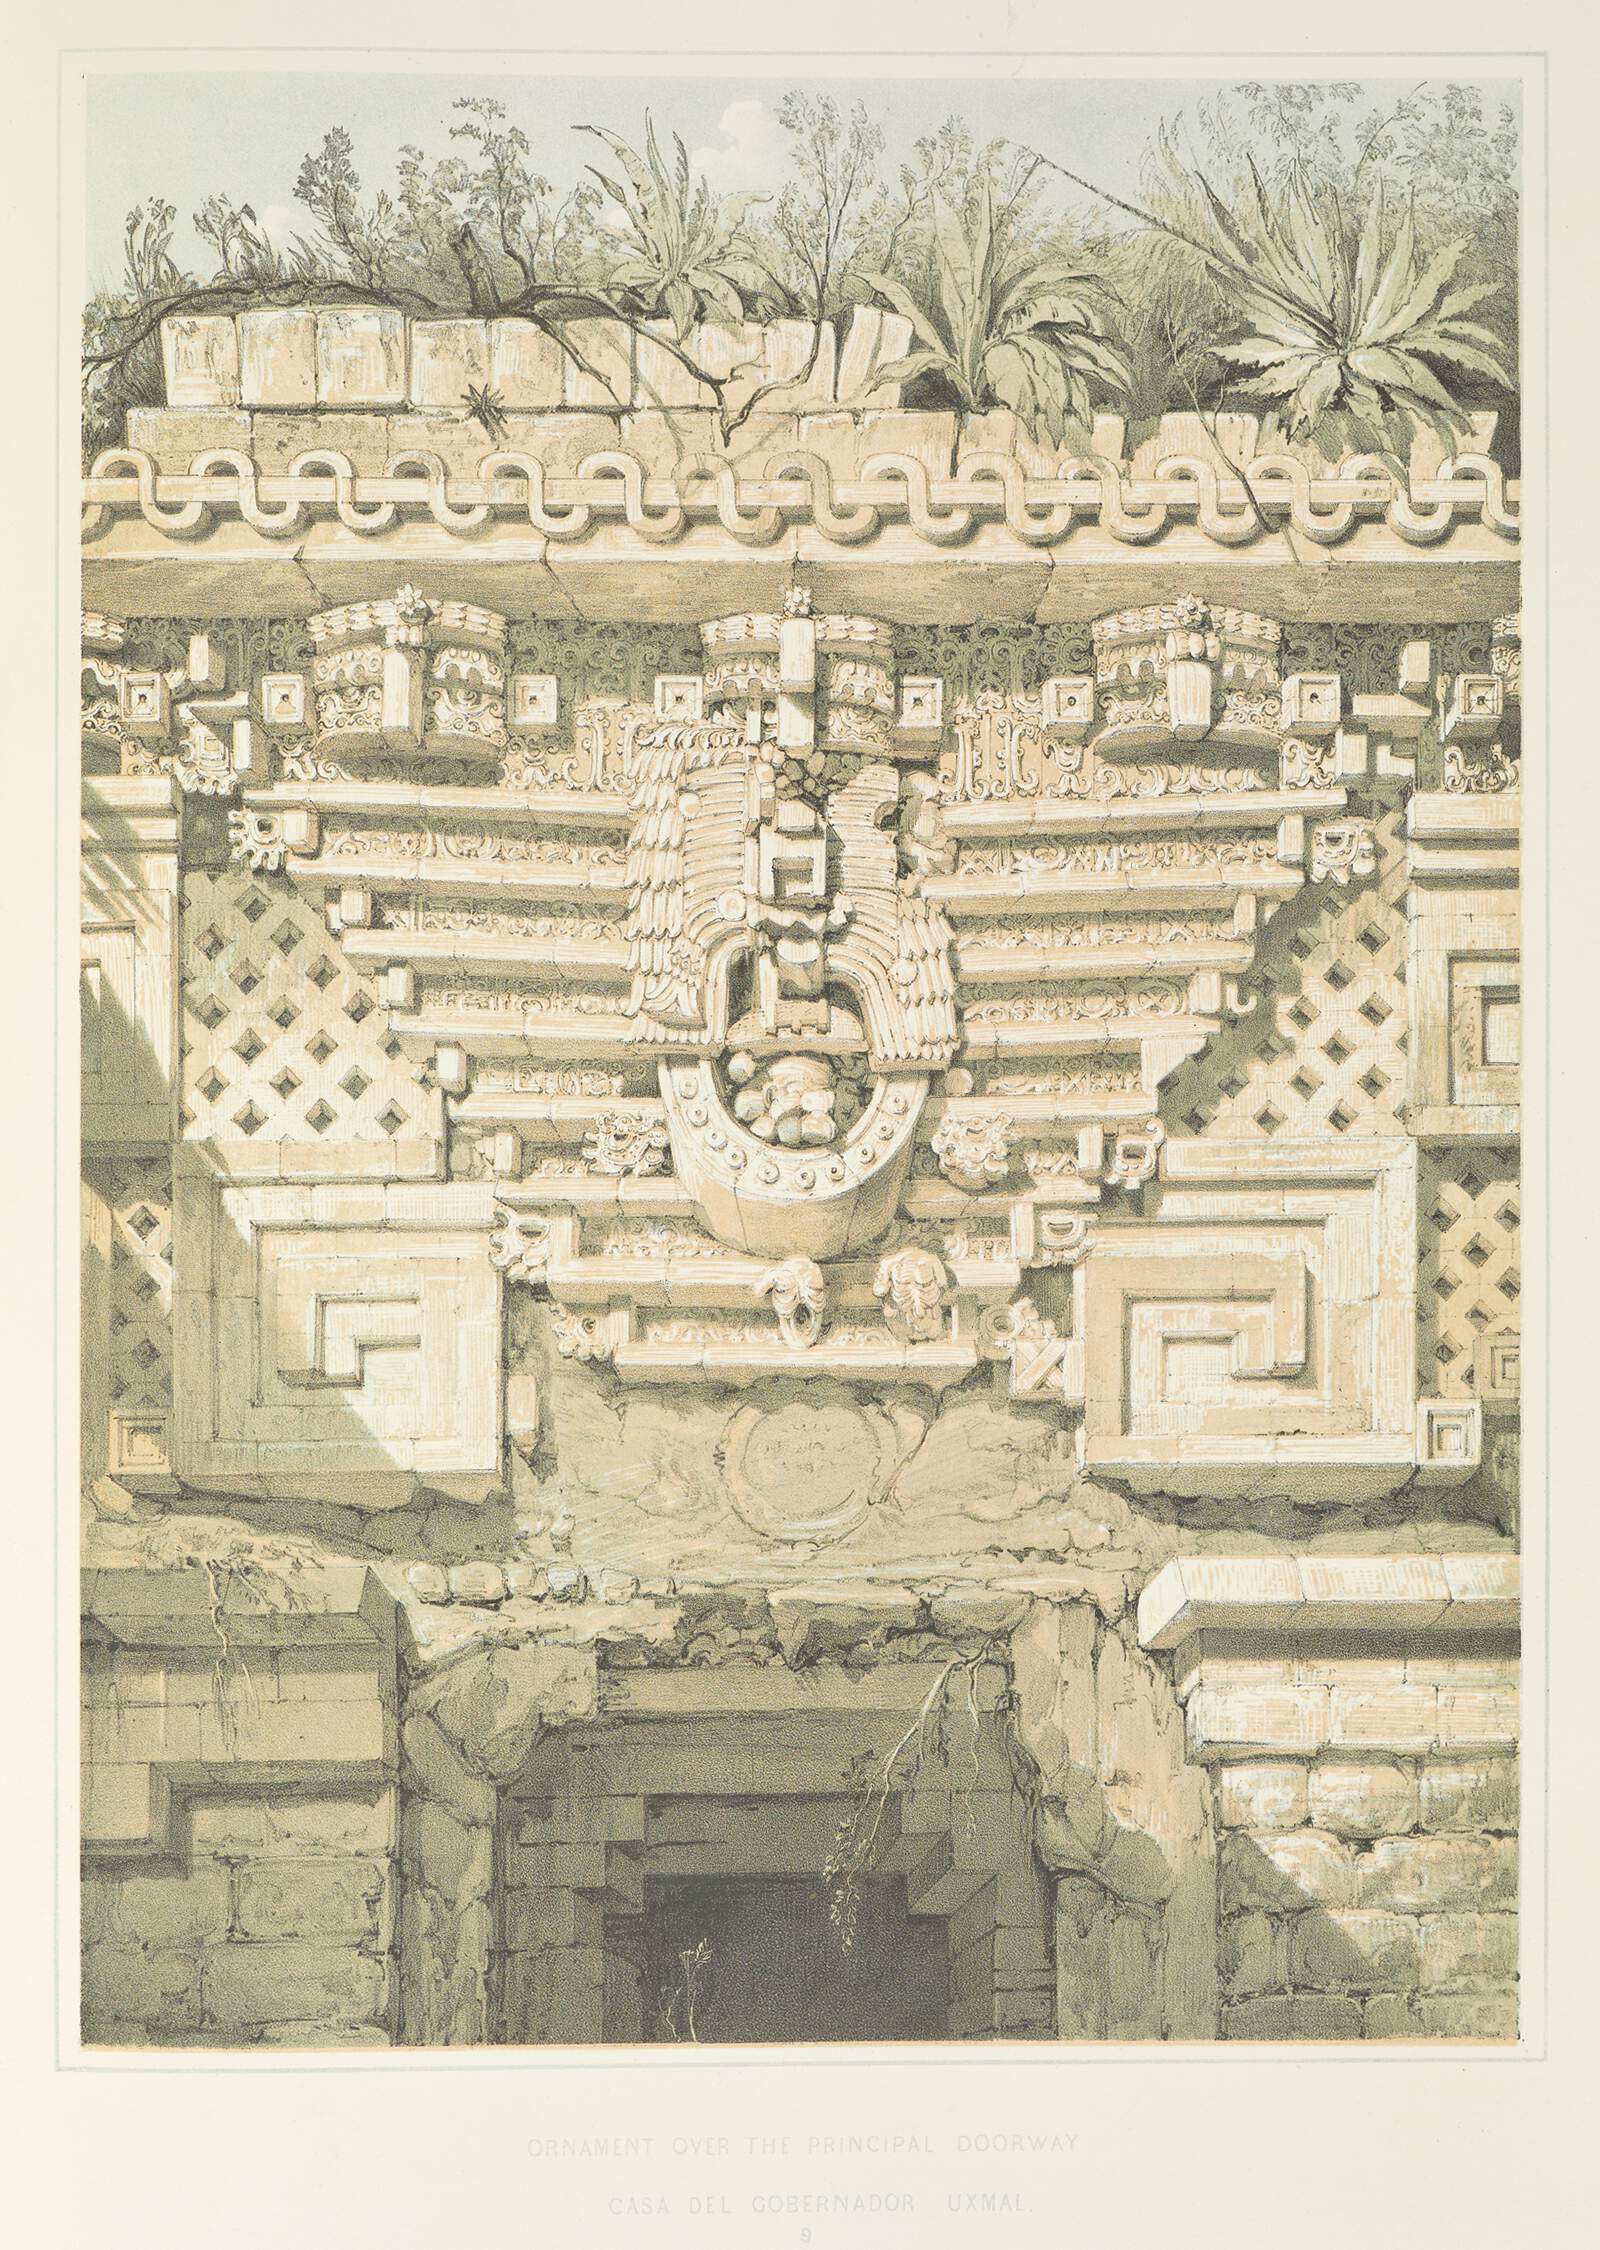 https://www.oldbookillustrations.com/wp-content/high-res/1844/uxmal-governors-palace-rawscan.jpg